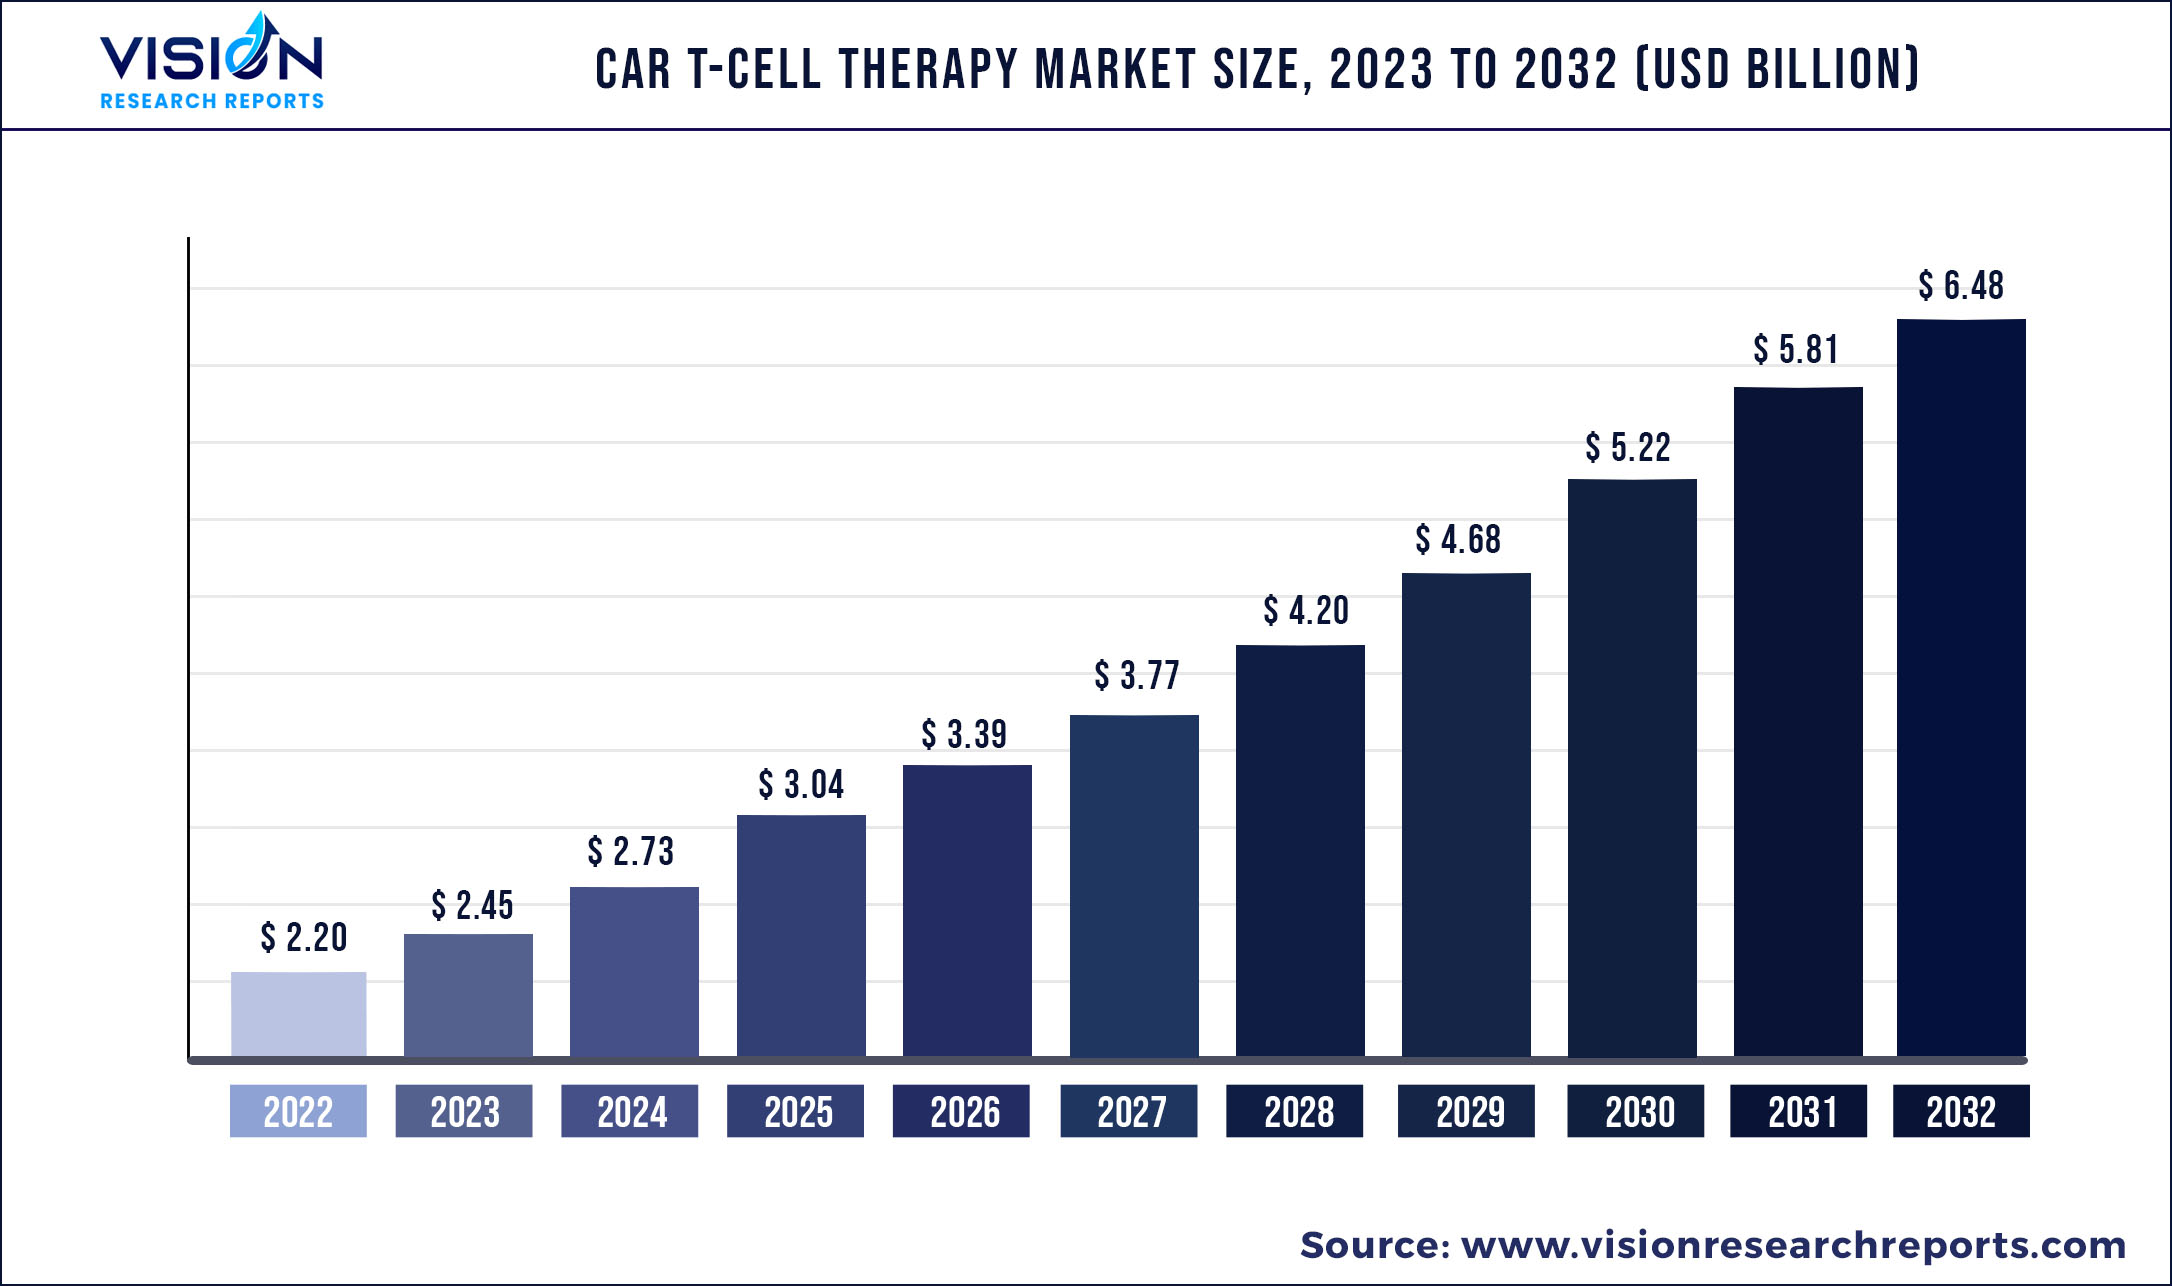 CAR T-Cell Therapy Market Size 2023 to 2032